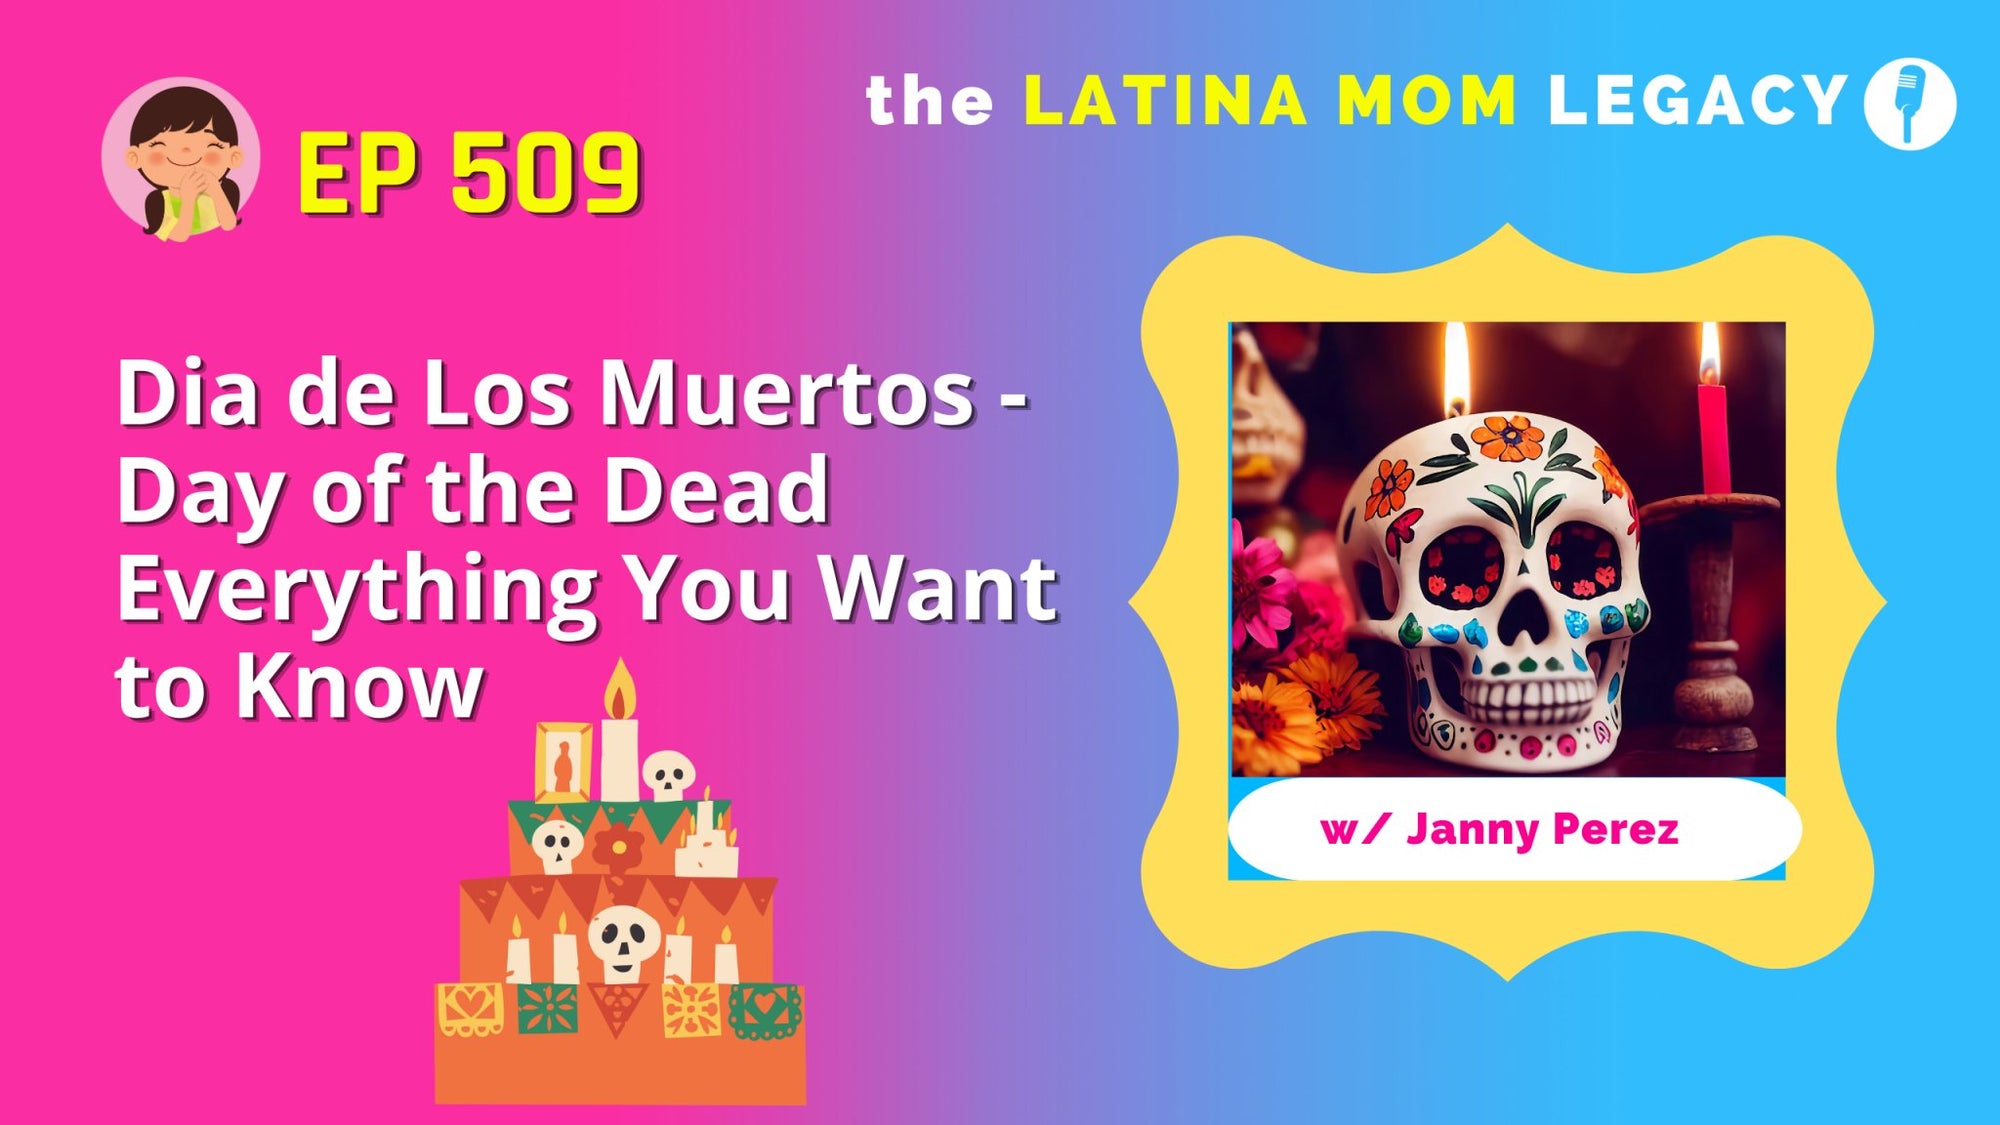 509-Dia de Los Muertos-Day of the Dead: Everything You Want to Know - Mi LegaSi